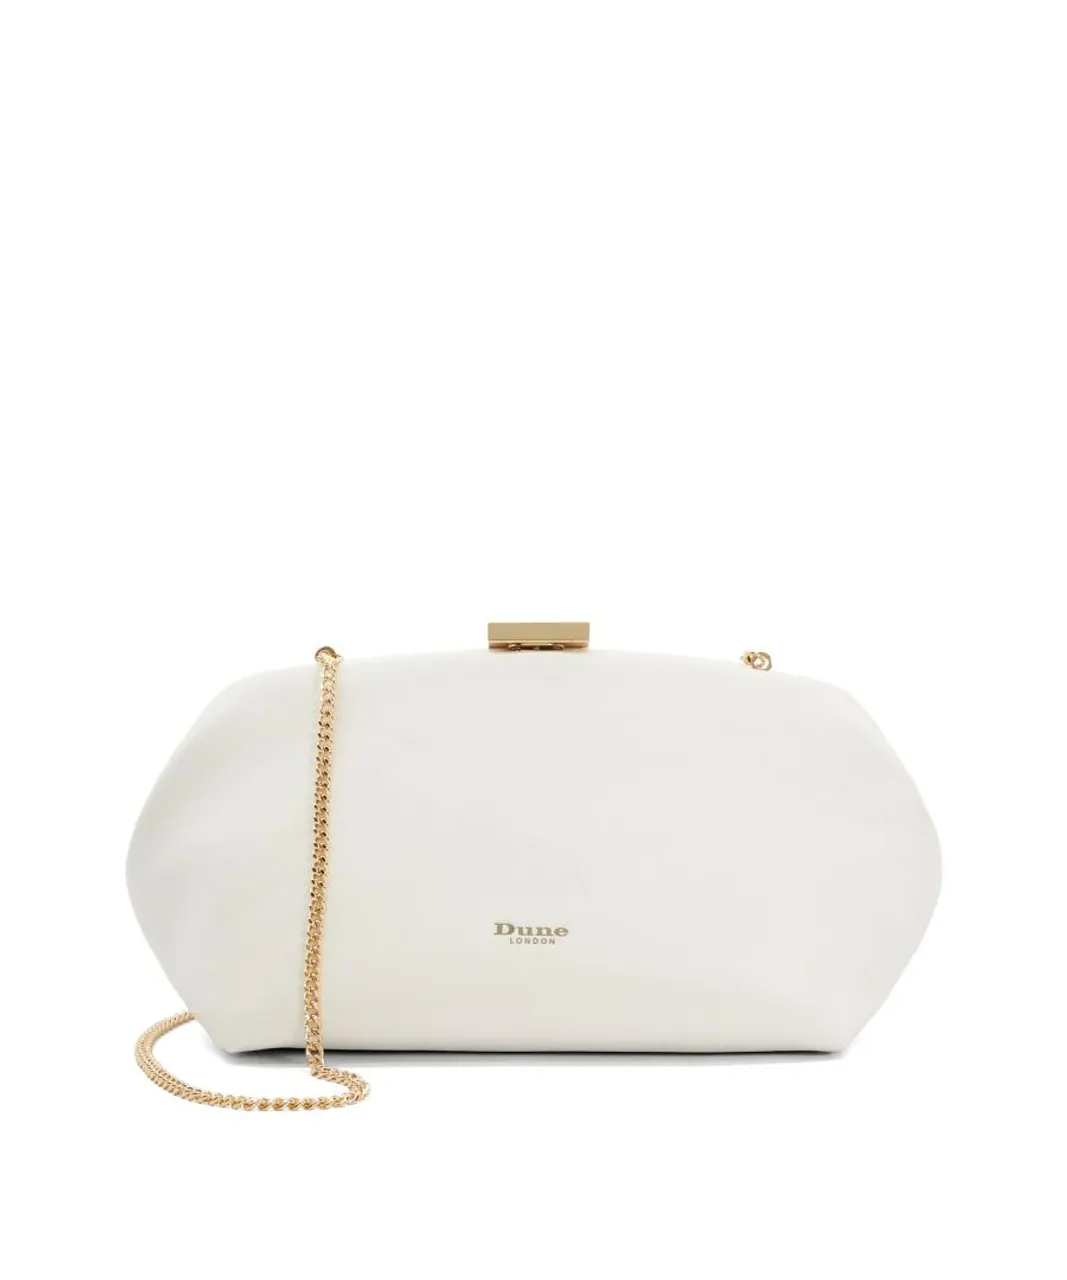 Dune London Womens Accessories Expect - Clasp Clutch Bag - White - One Size